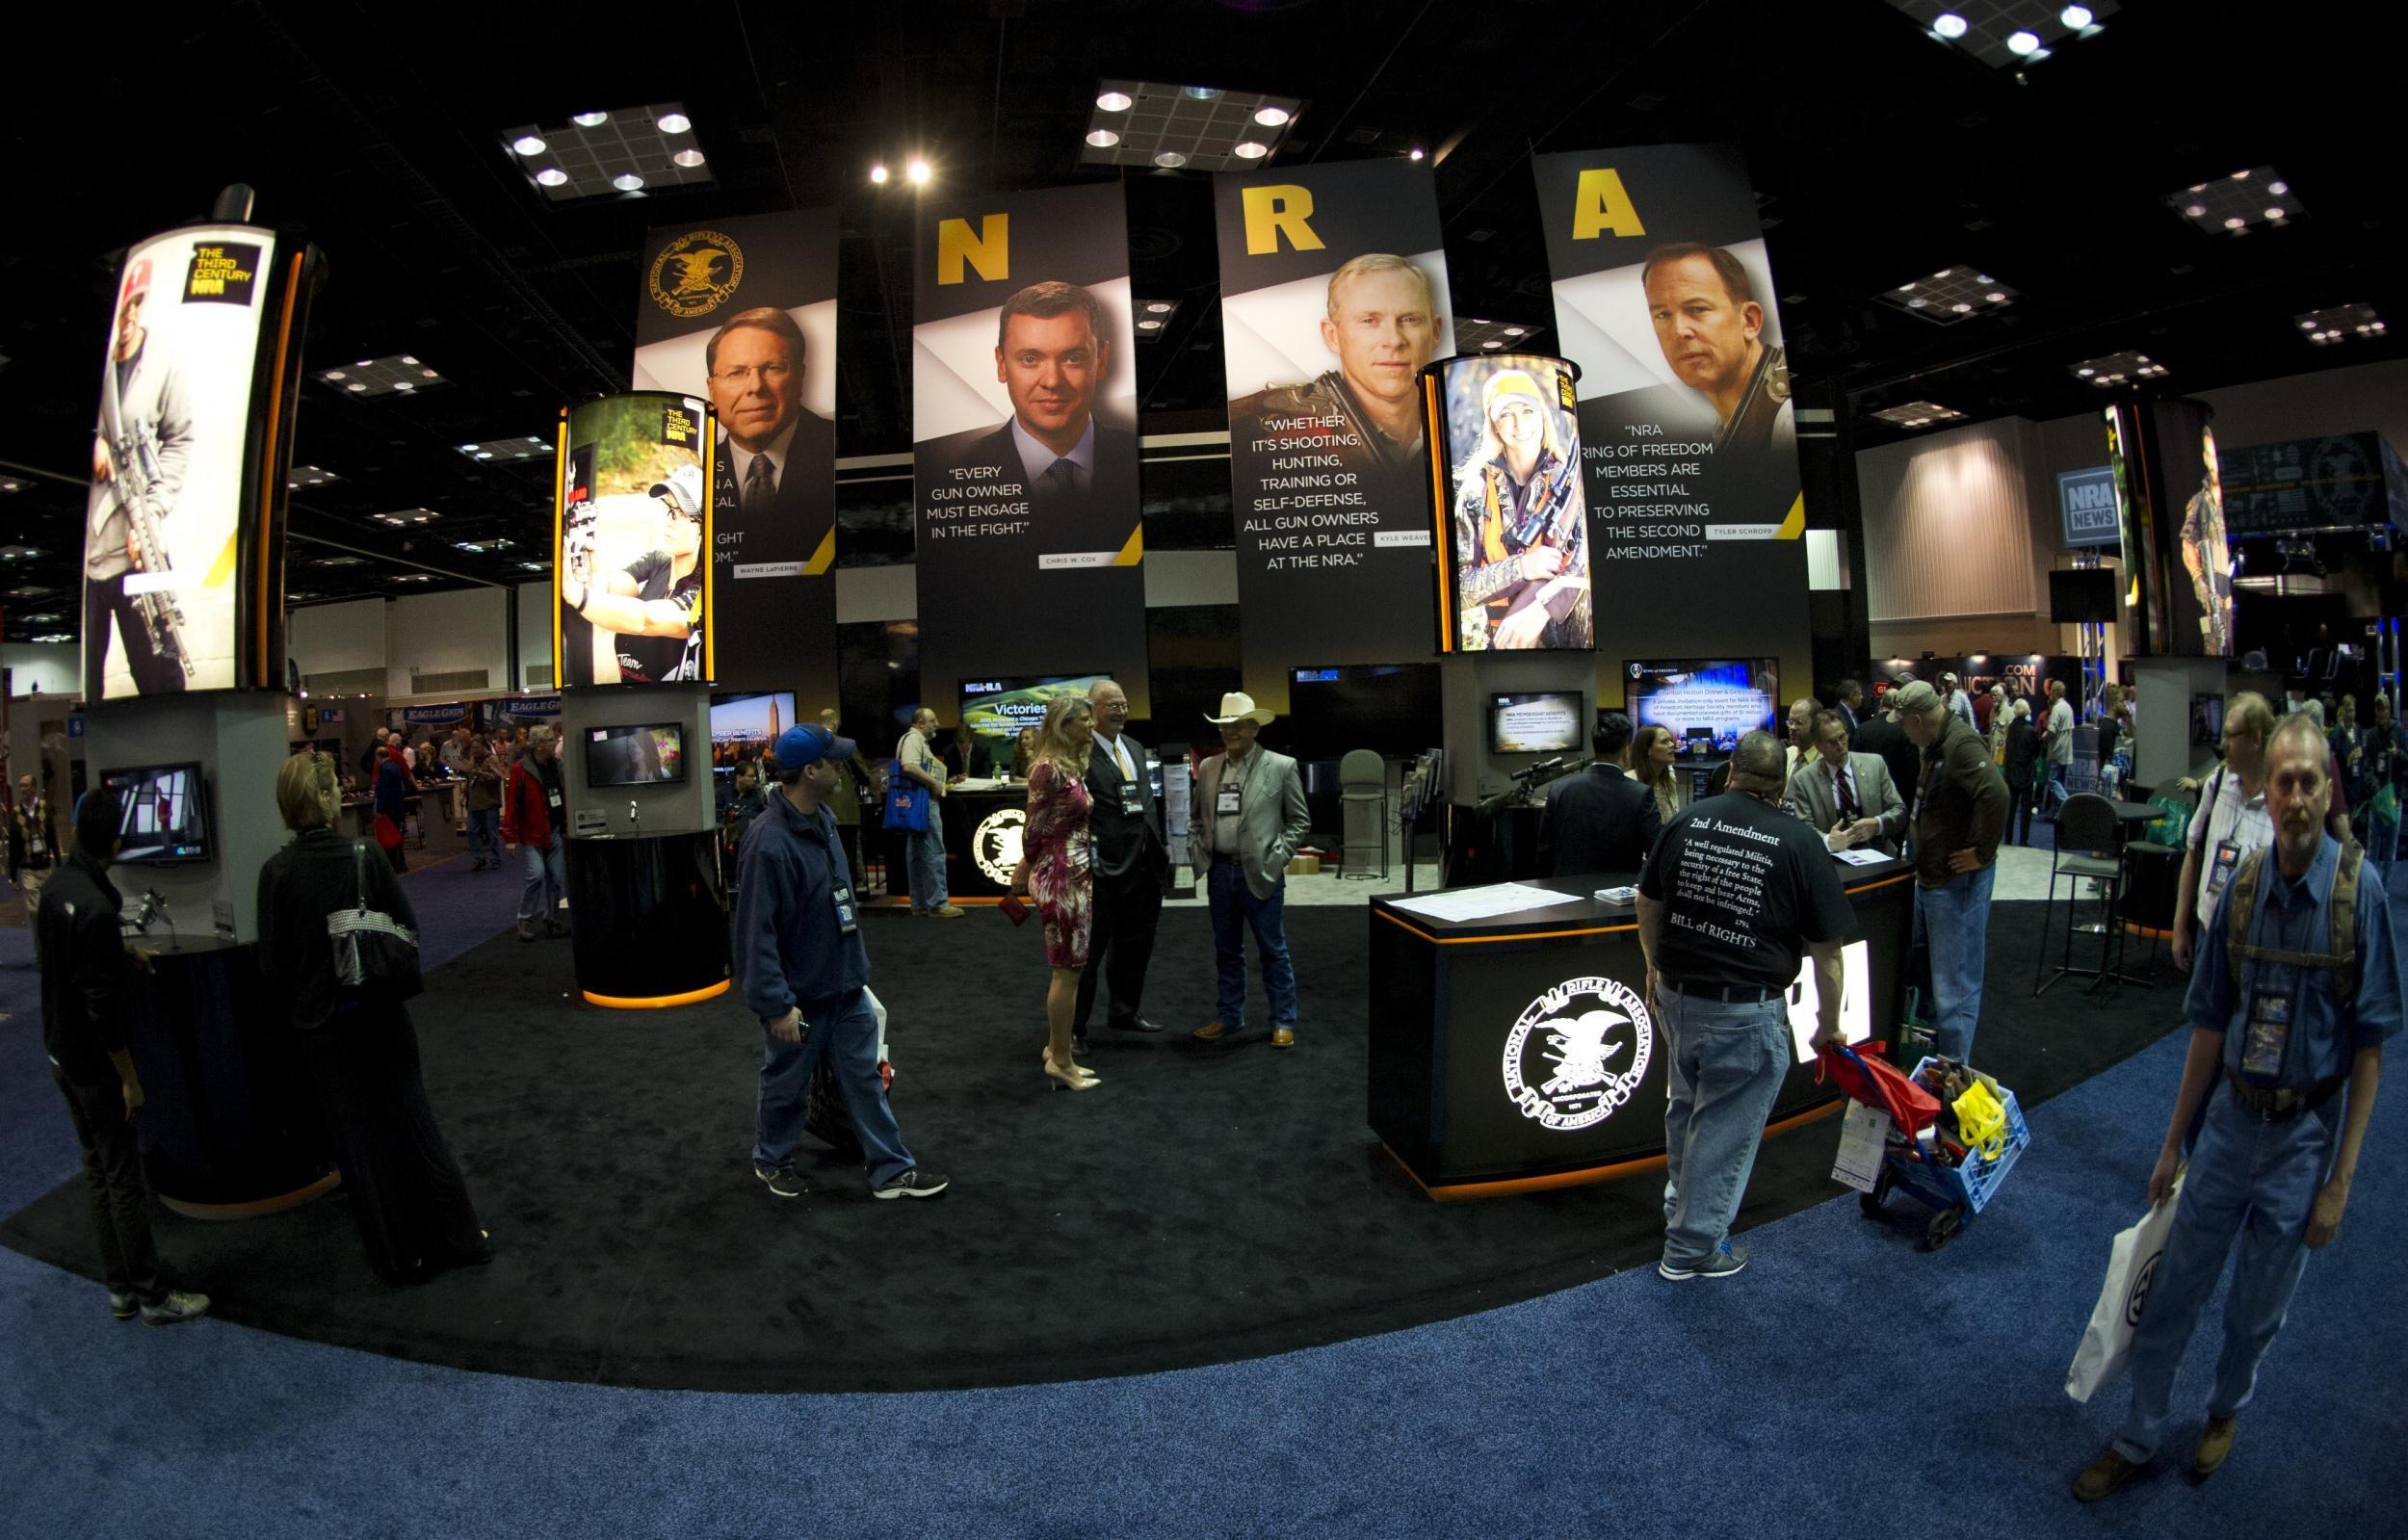 Convention goers walk through the NRA booth at the143rd NRA Annual Meetings and Exhibits at the Indiana Convention Center